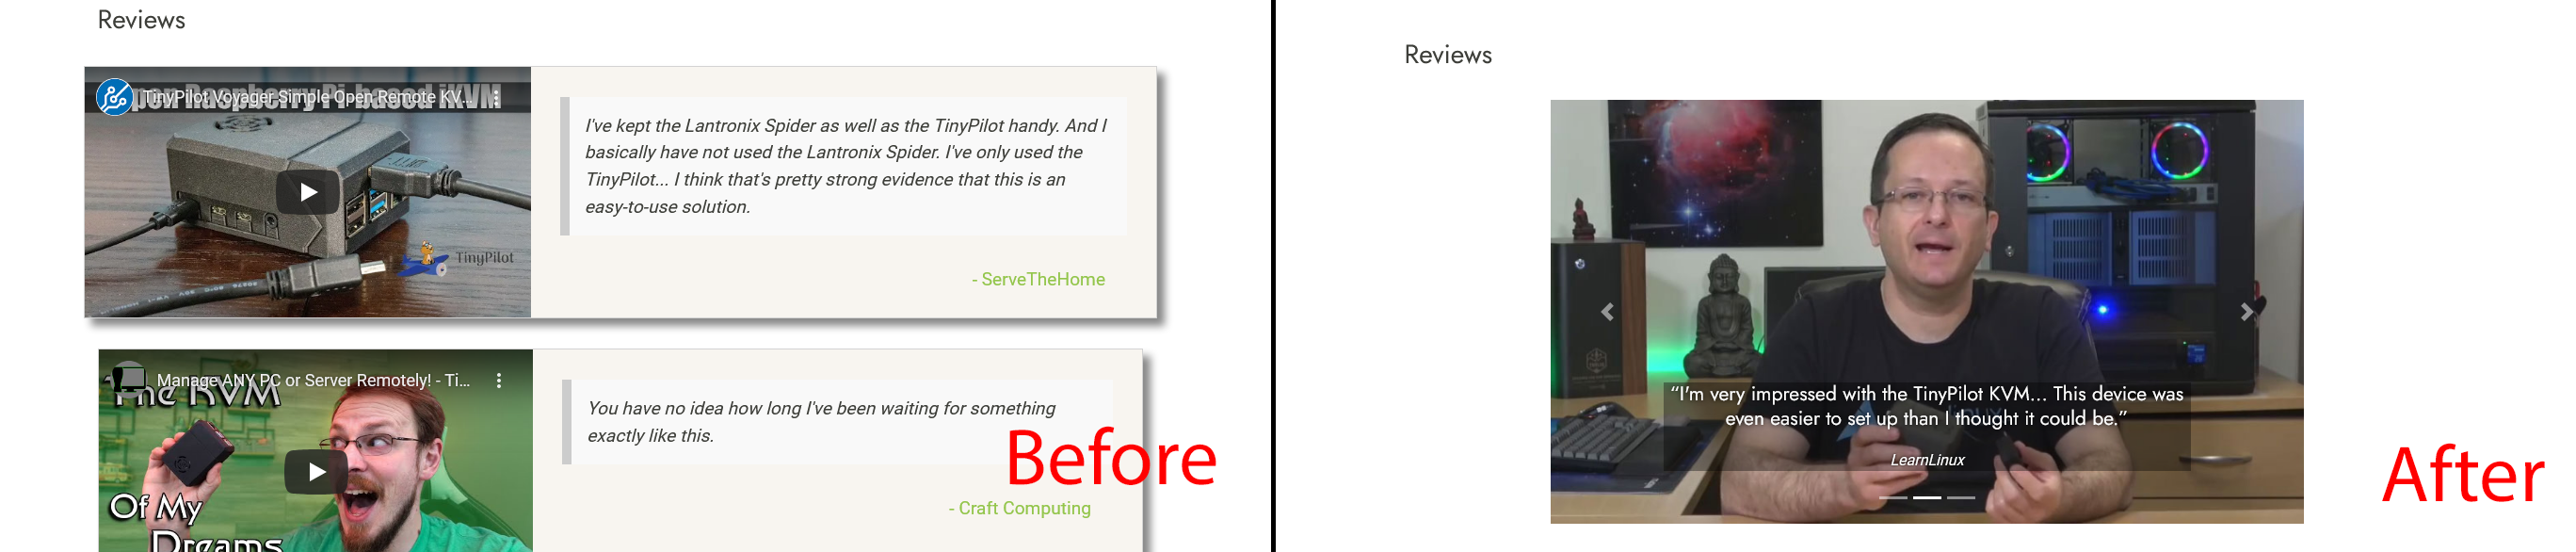 Before and after shots of reviews on TinyPilot website